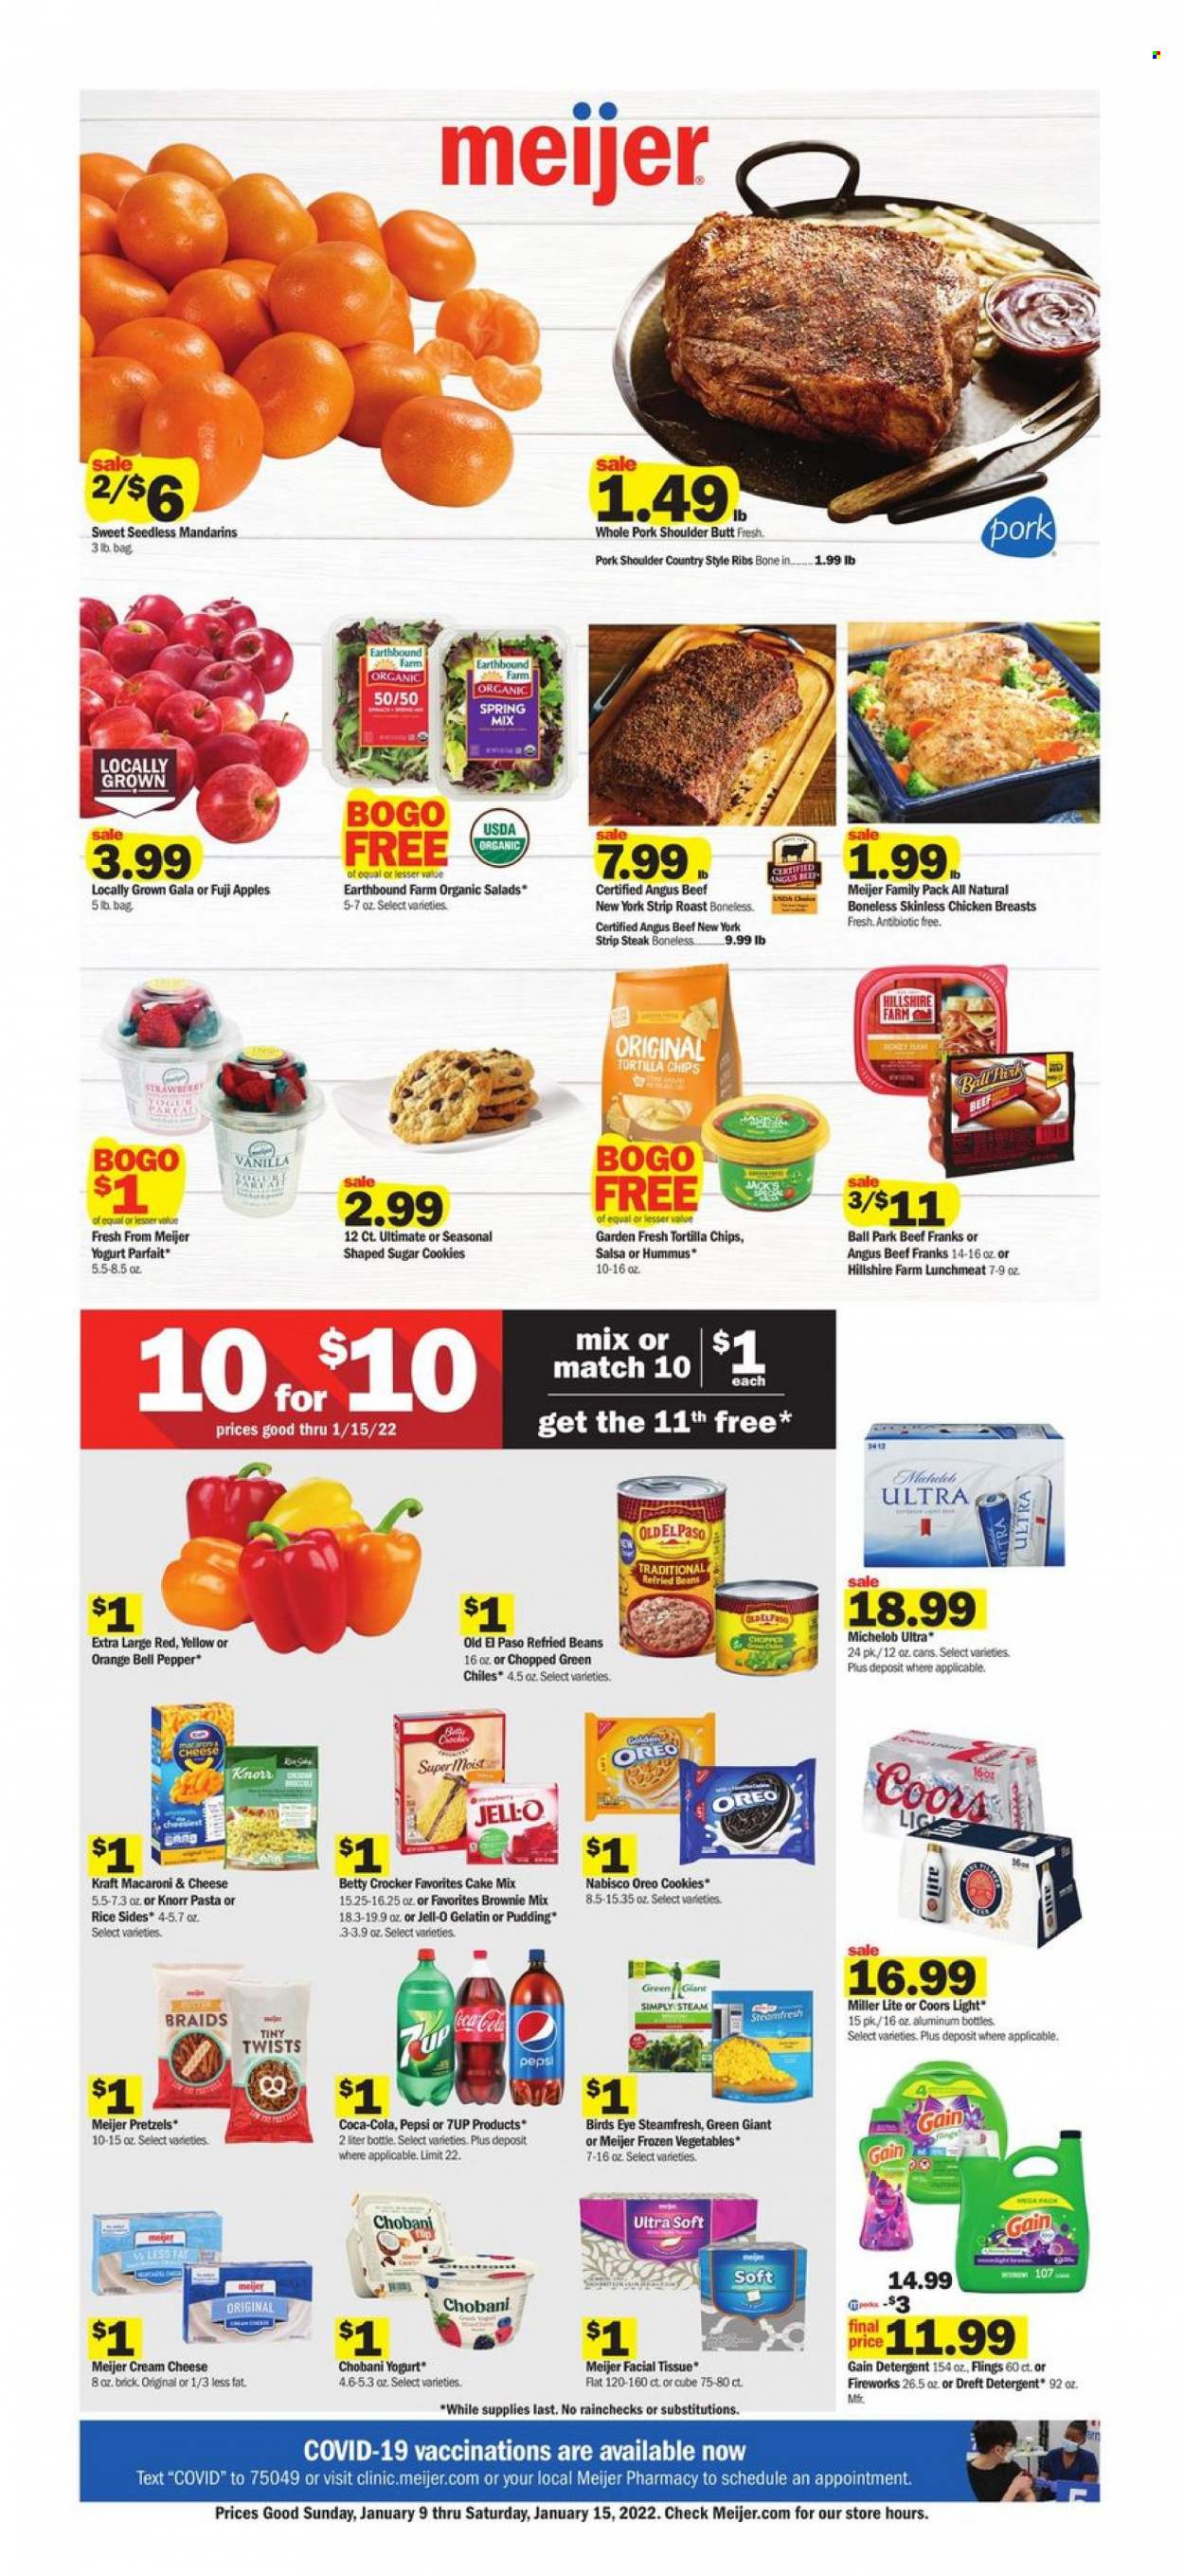 thumbnail - Meijer Flyer - 01/09/2022 - 01/15/2022 - Sales products - pretzels, Old El Paso, brownie mix, cake mix, beans, bell peppers, salad, apples, Gala, mandarines, oranges, Fuji apple, macaroni & cheese, Knorr, Bird's Eye, Kraft®, Hillshire Farm, hummus, lunch meat, cream cheese, pudding, Oreo, yoghurt, Chobani, frozen vegetables, cookies, tortilla chips, Jell-O, refried beans, rice, salsa, Coca-Cola, Pepsi, 7UP, beer, chicken breasts, beef meat, steak, striploin steak, pork meat, pork ribs, pork shoulder, country style ribs, tissues, detergent, Gain, gelatin, Miller Lite, Coors, Michelob. Page 1.